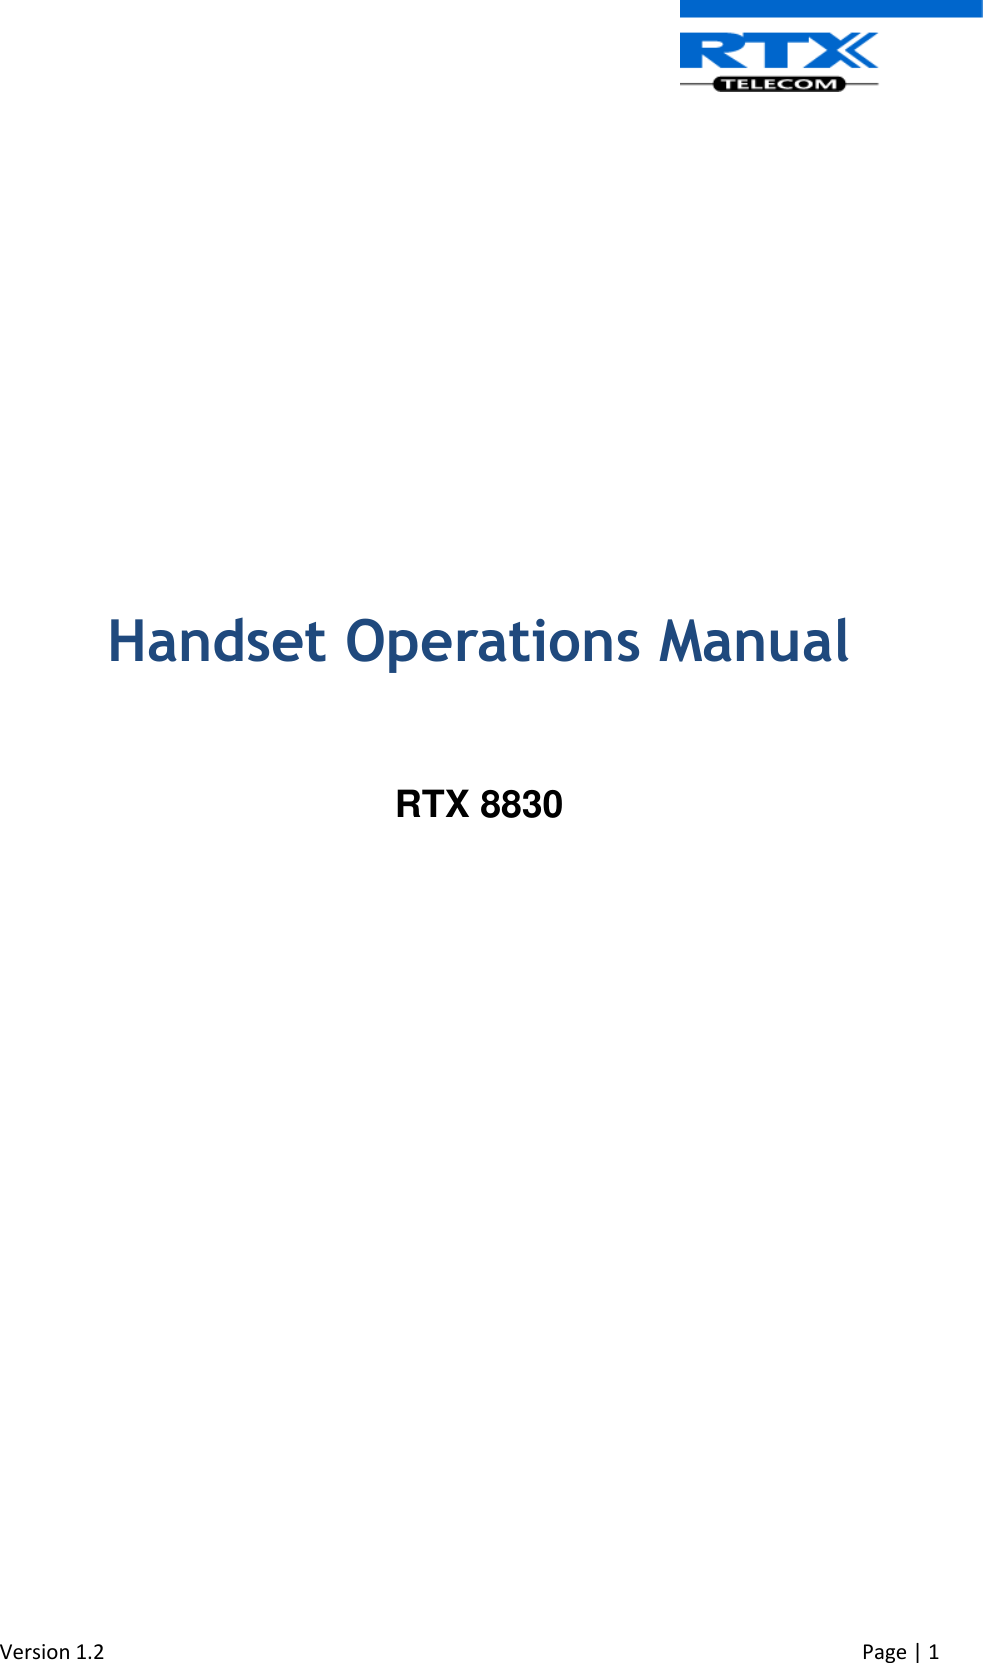  Version 1.2     Page | 1          Handset Operations Manual  RTX 8830            